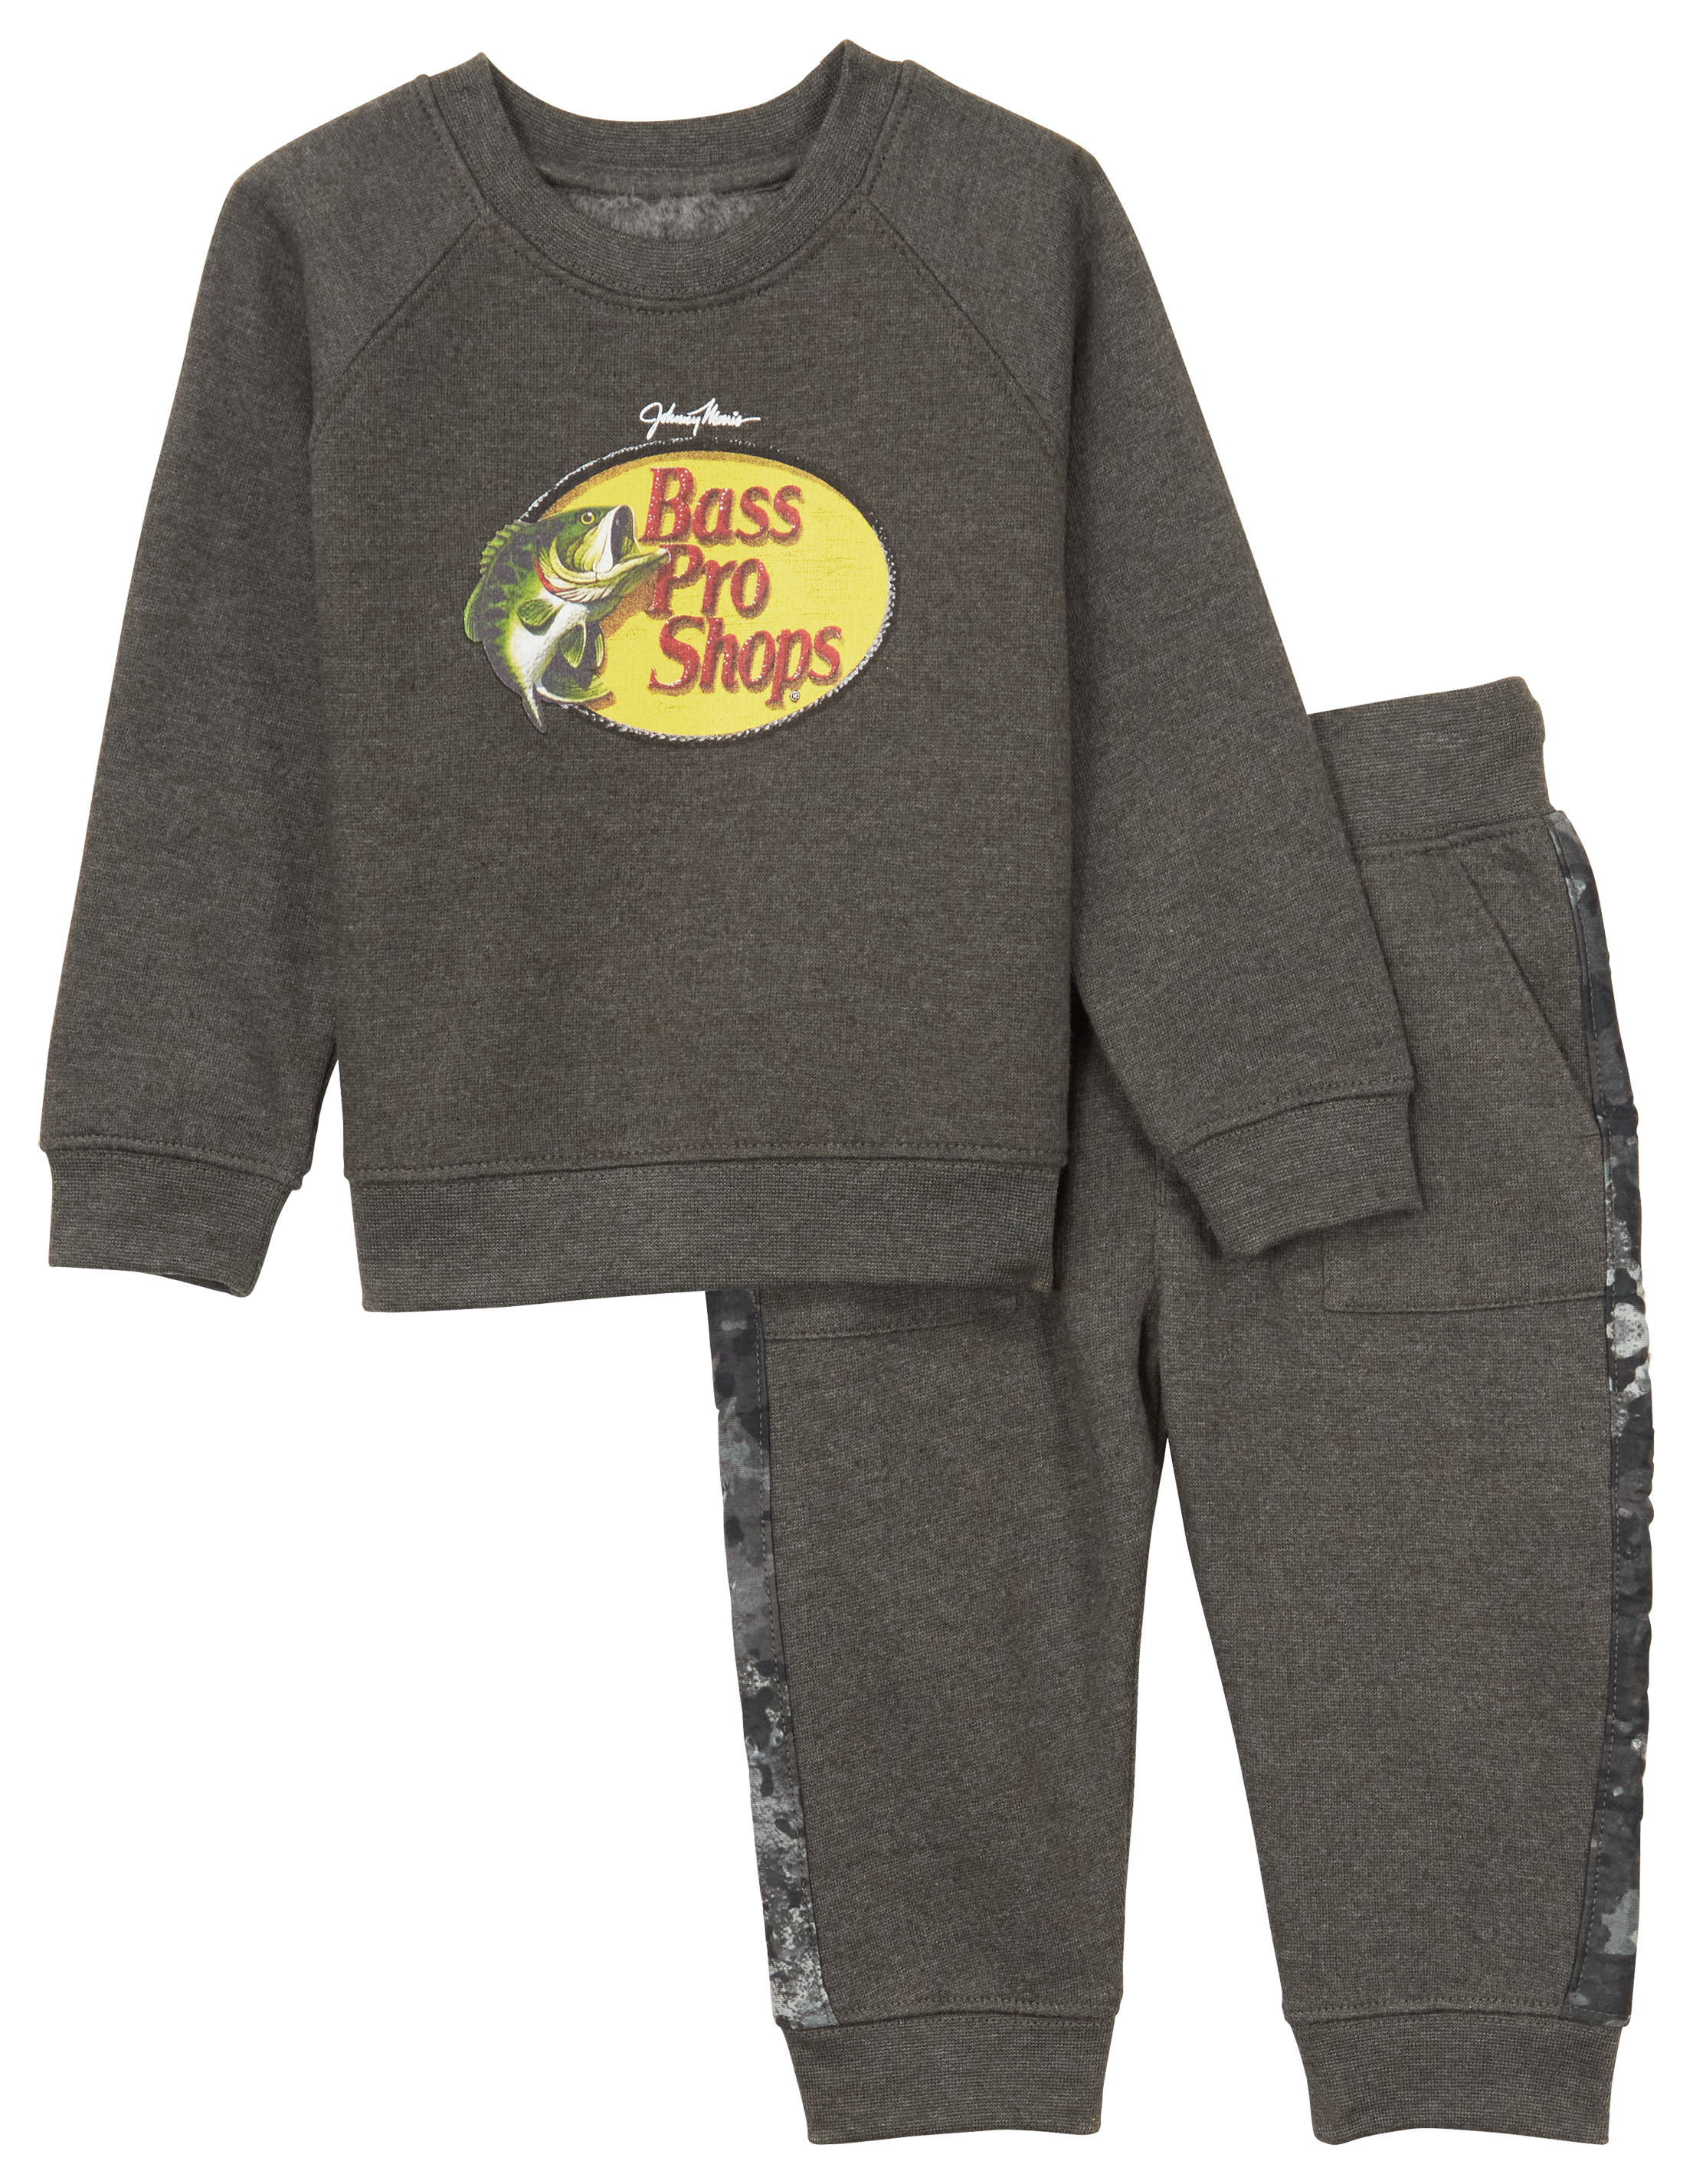 Bass Pro Shops Logo Long-Sleeve Sweatshirt and Pants Set for Babies - Indian Teal - 0-3 Months